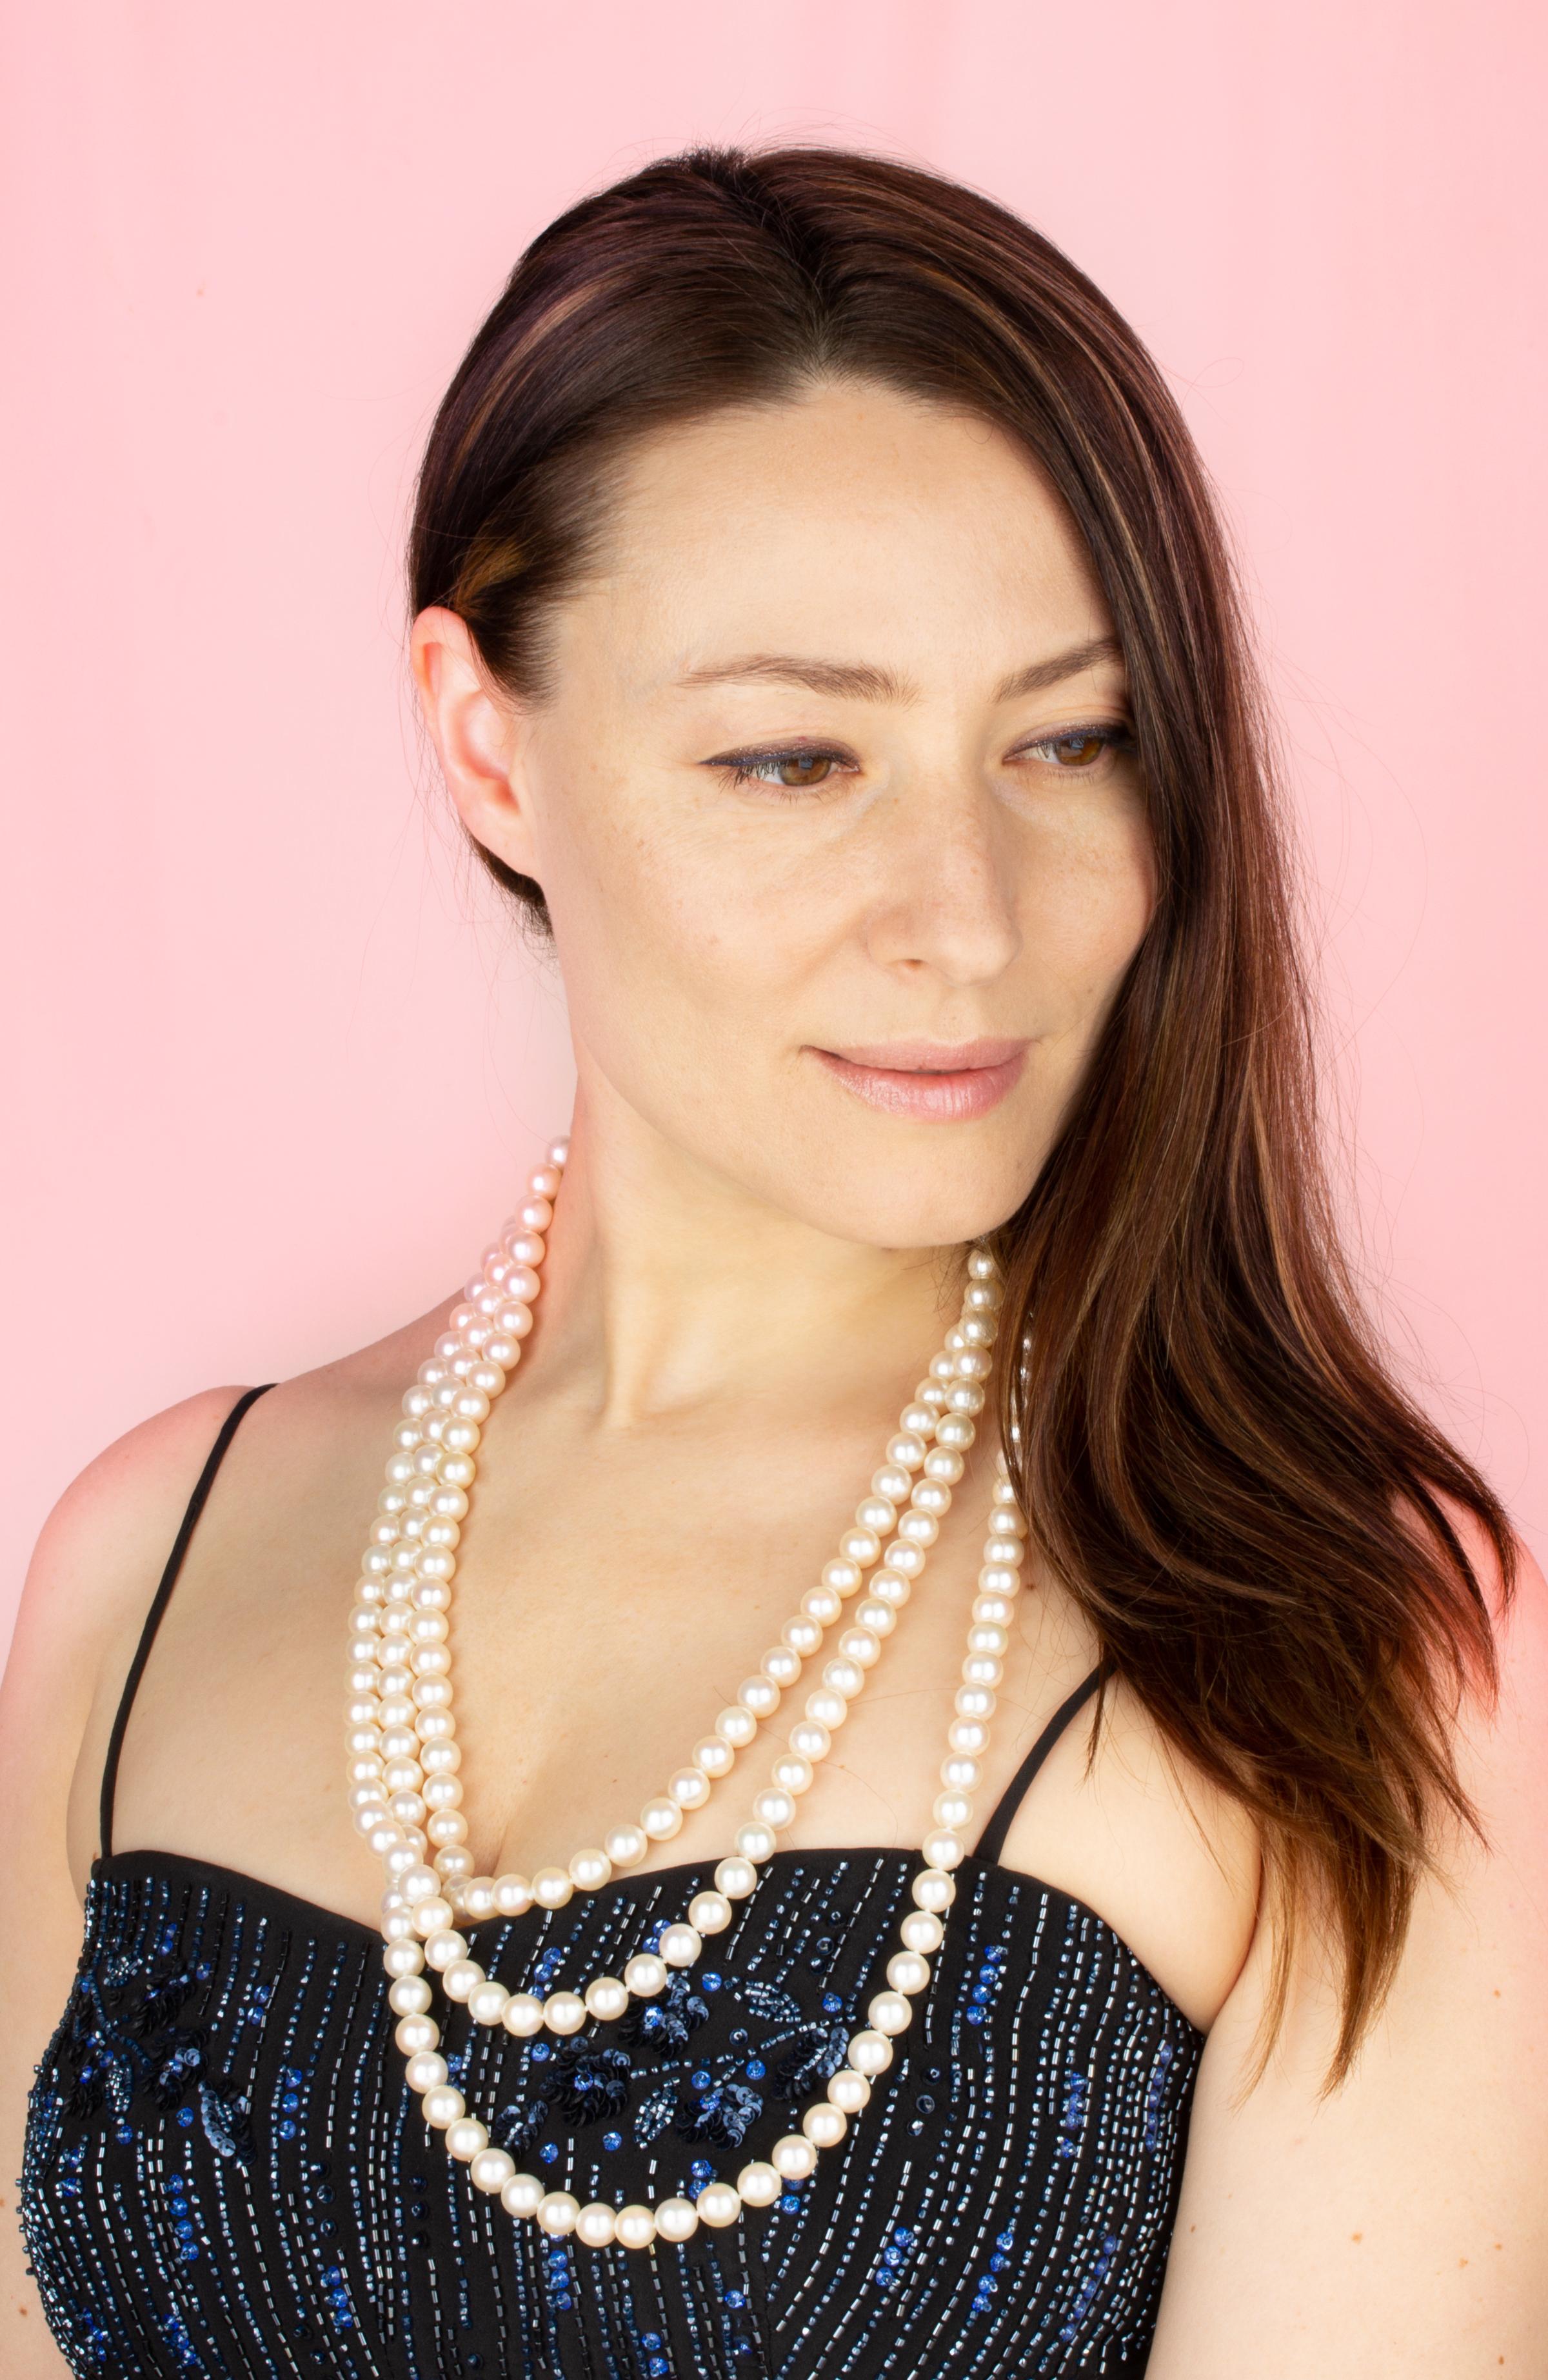 The 84” Japanese Akoya pearl necklace consists of 222 homogeneous round pearls (Pinctada Fucata) of 9.5mm diameter. The pearls display a lovely nacre, lustre, and iridescence. The necklace is held together by a handmade 18 carat white gold clasp